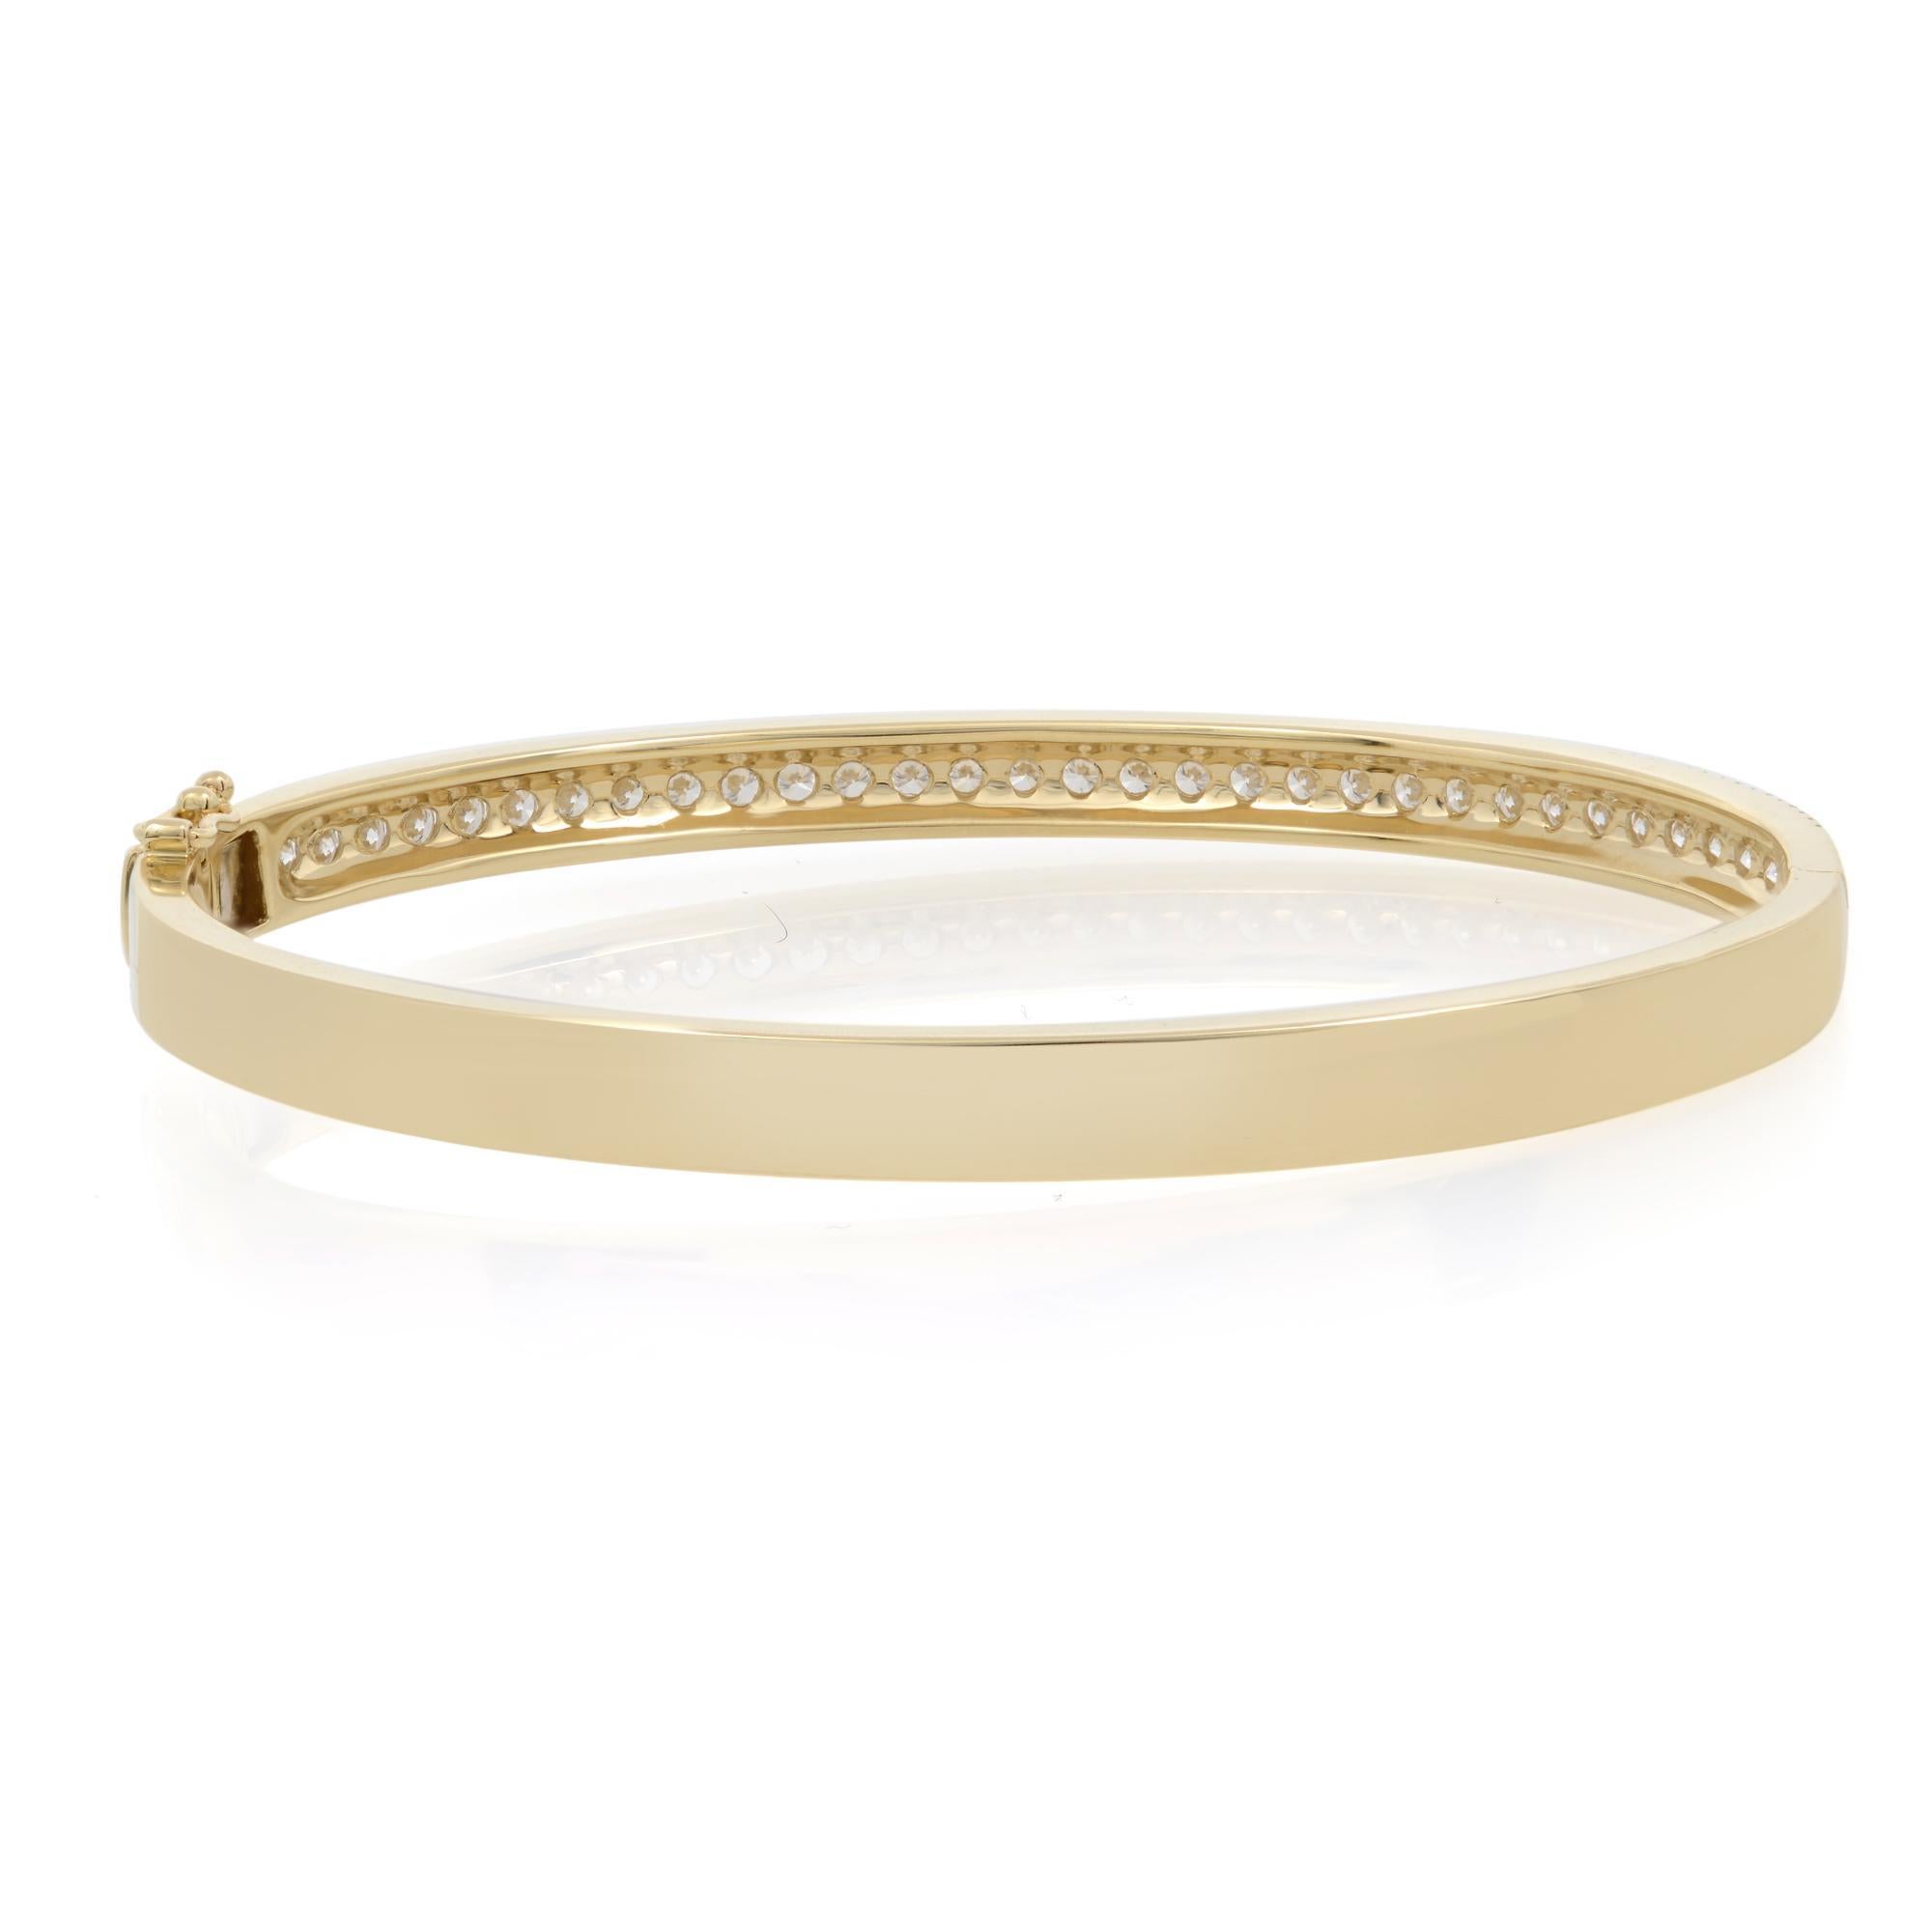 Rachel Koen Round Cut Diamond Bangle Bracelet 14K Yellow Gold 1.70Cttw In New Condition For Sale In New York, NY